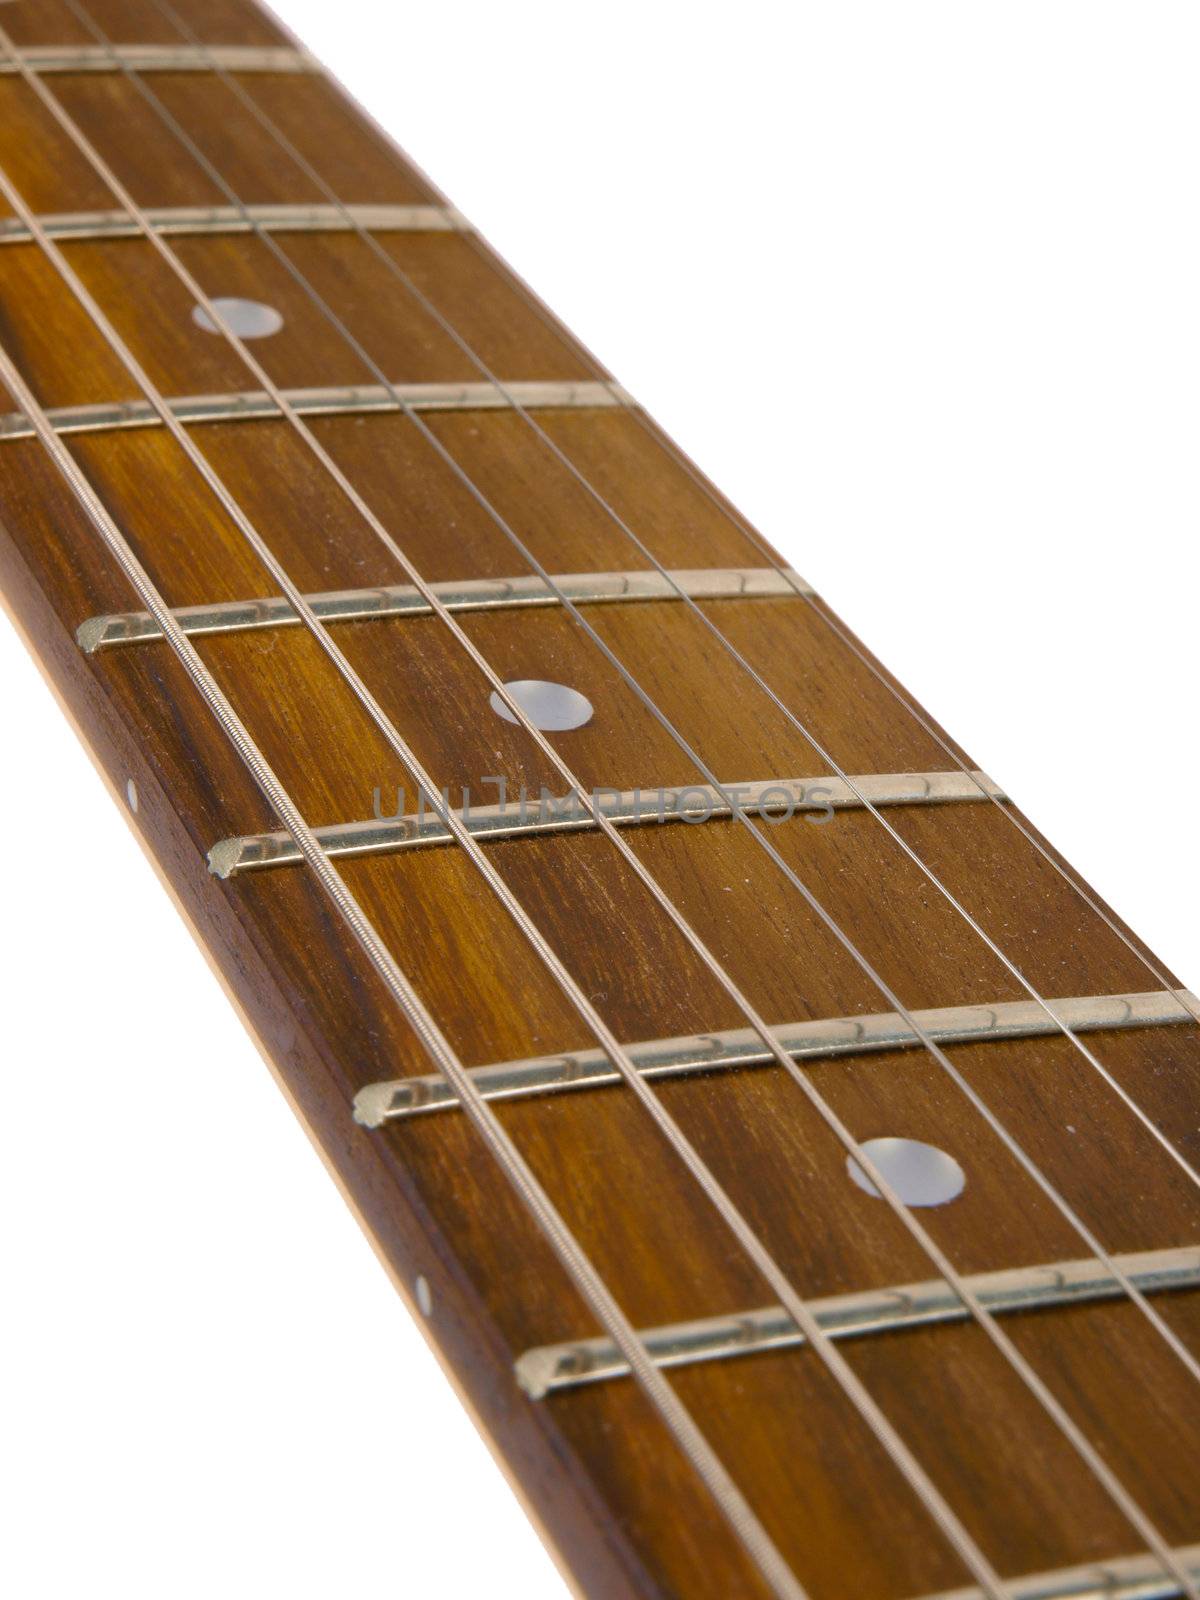 guitar neck with strings. Close up on white background by dotweb